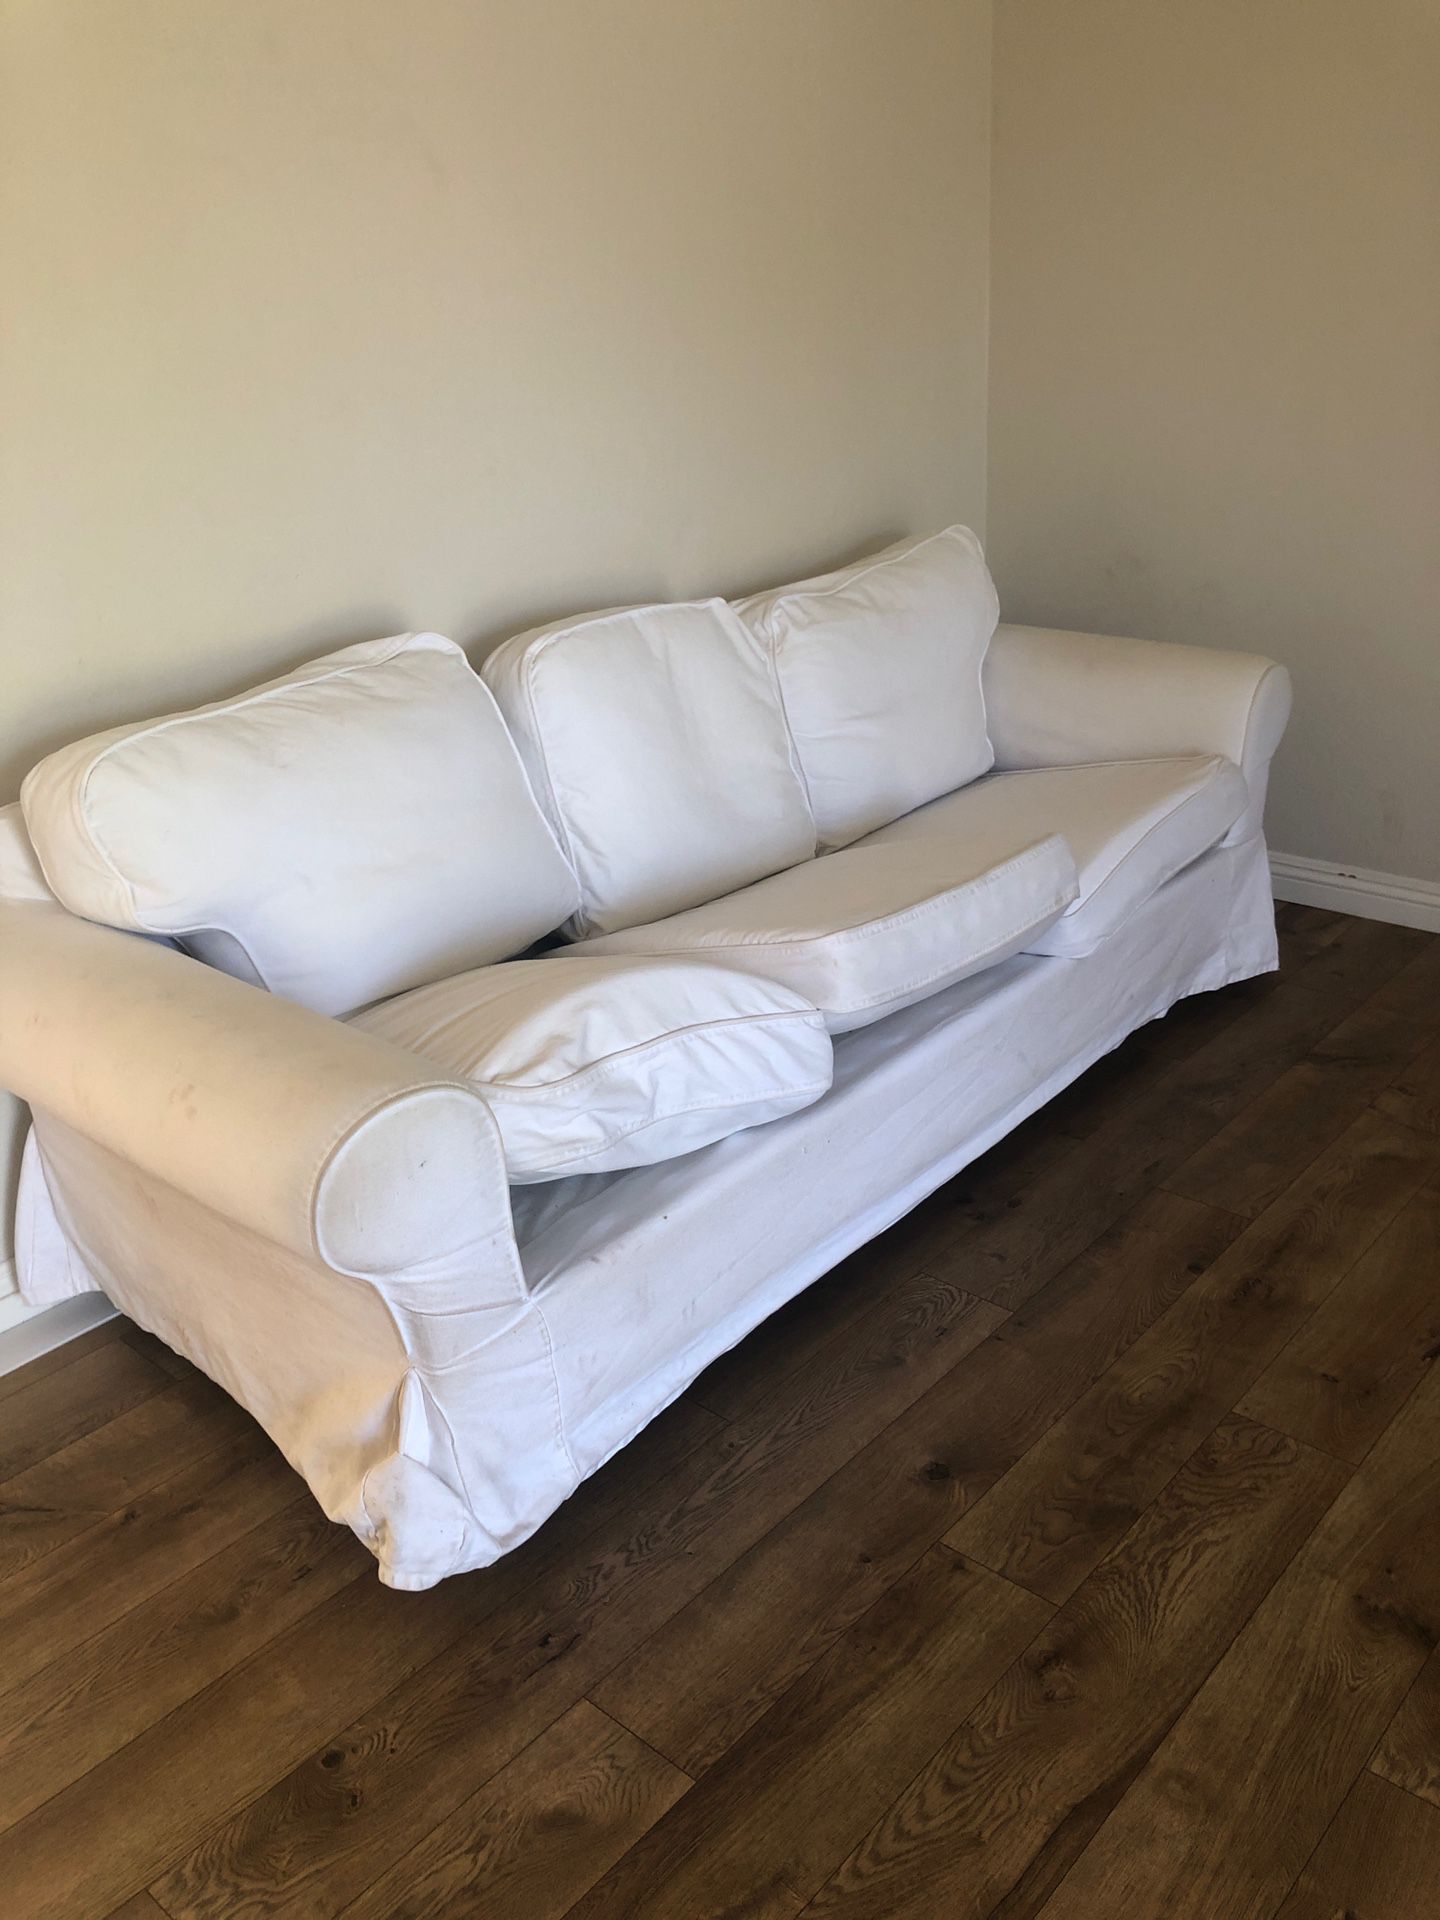 Free couches. Pickup this week